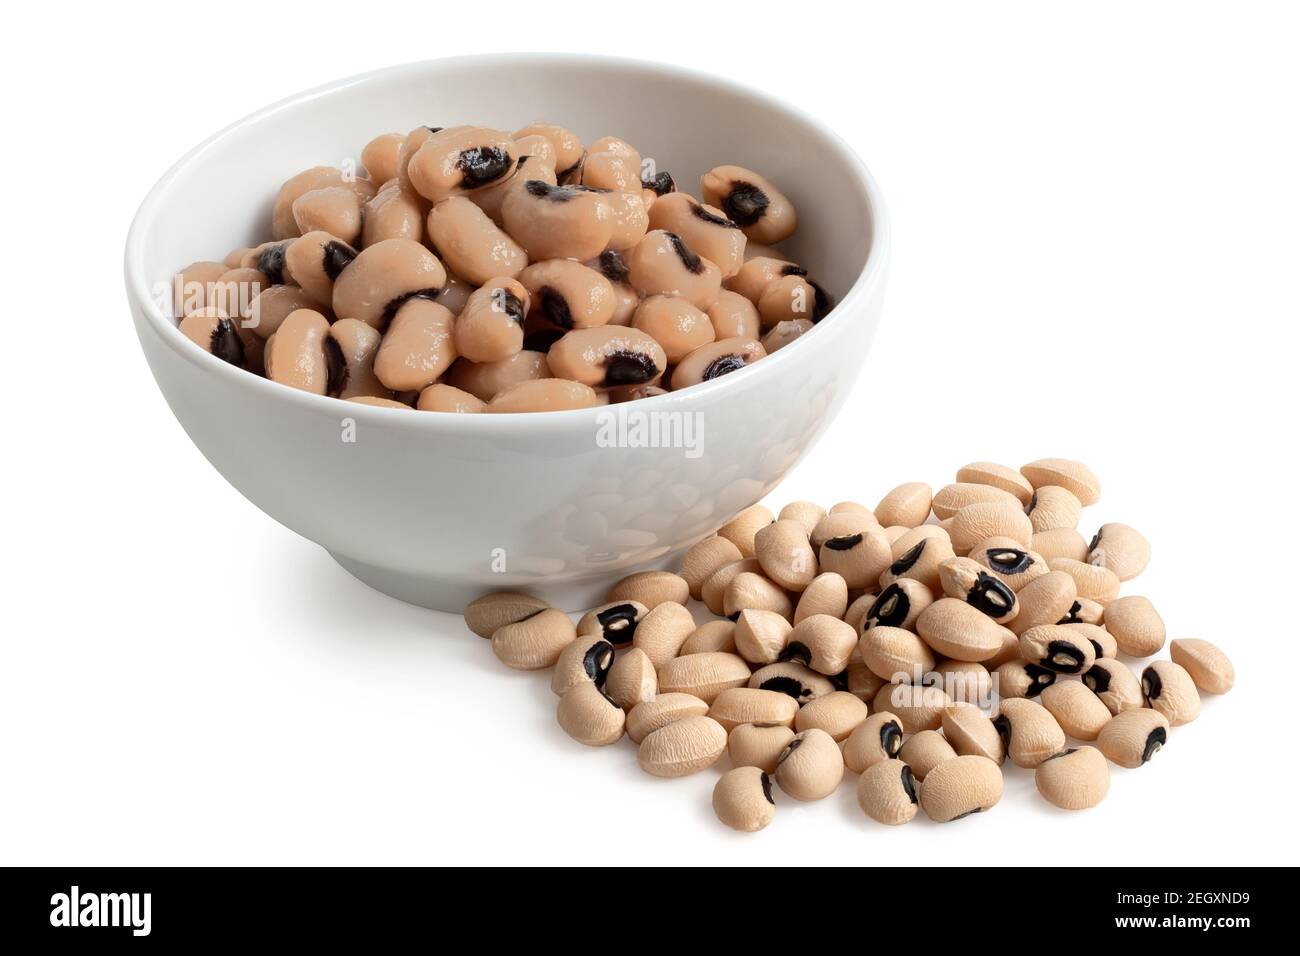 Cooked black-eyed beans in a white ceramic bowl next to uncooked black-eyed beans isolated on white. Stock Photo